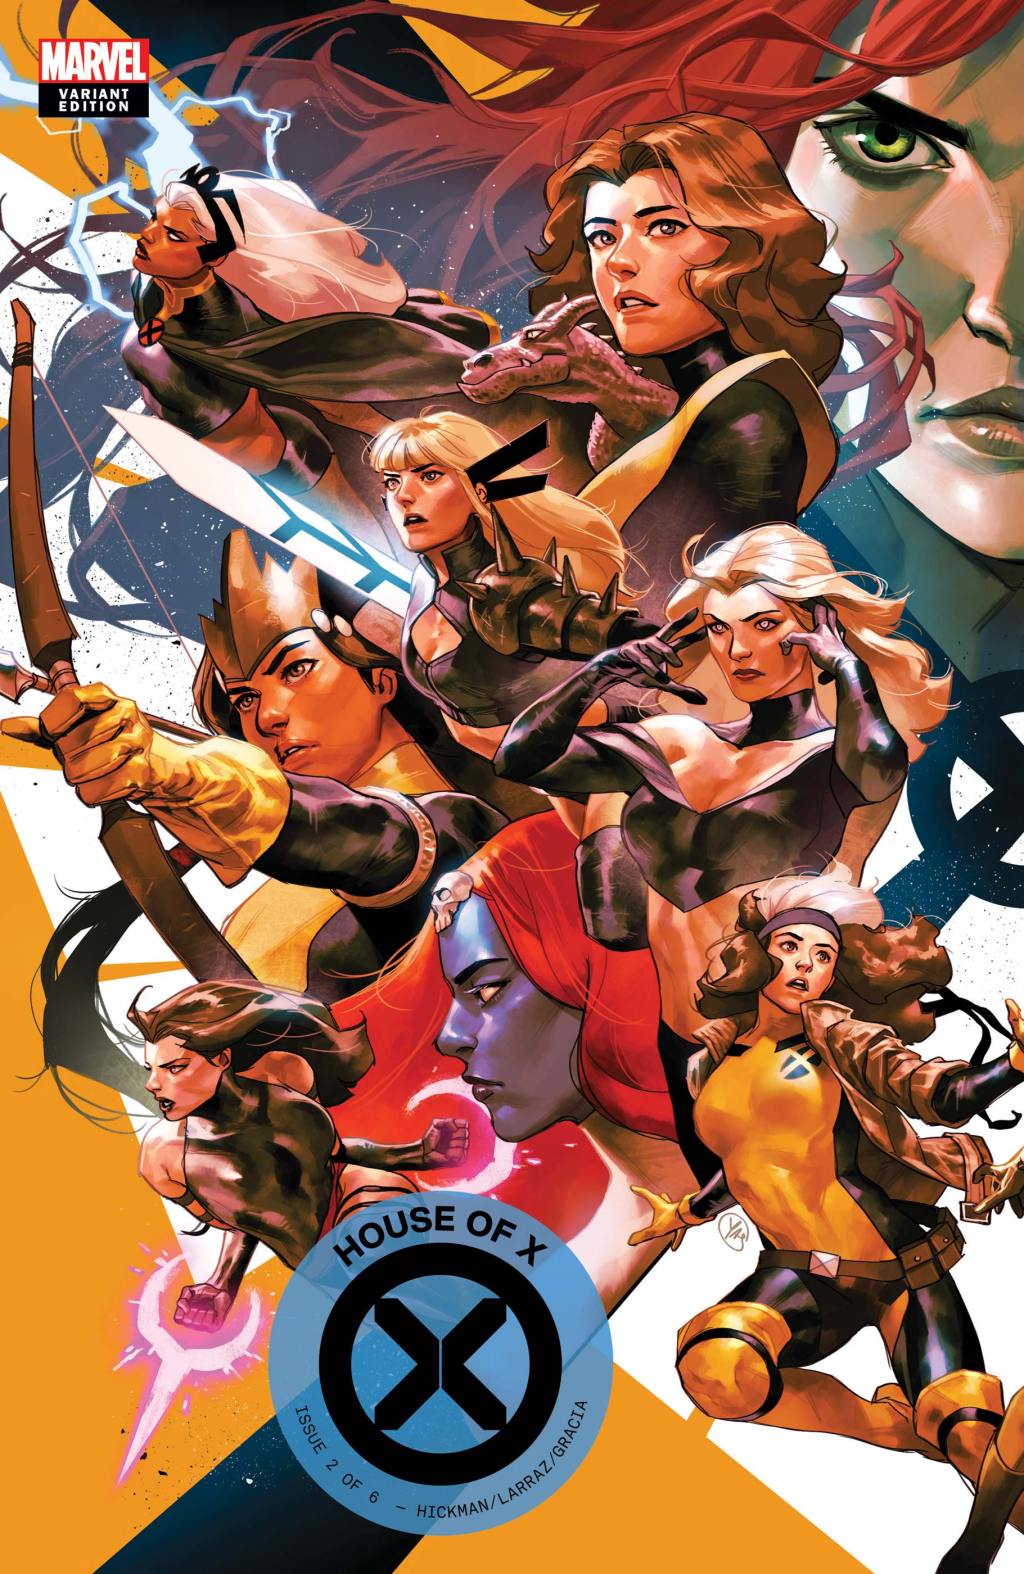 The female members of the X-Men assemble on Yasmin Putri's variant cover to House of X Vol. 1 #2 "The Uncanny Life of Moira X" (2019), Marvel Comics